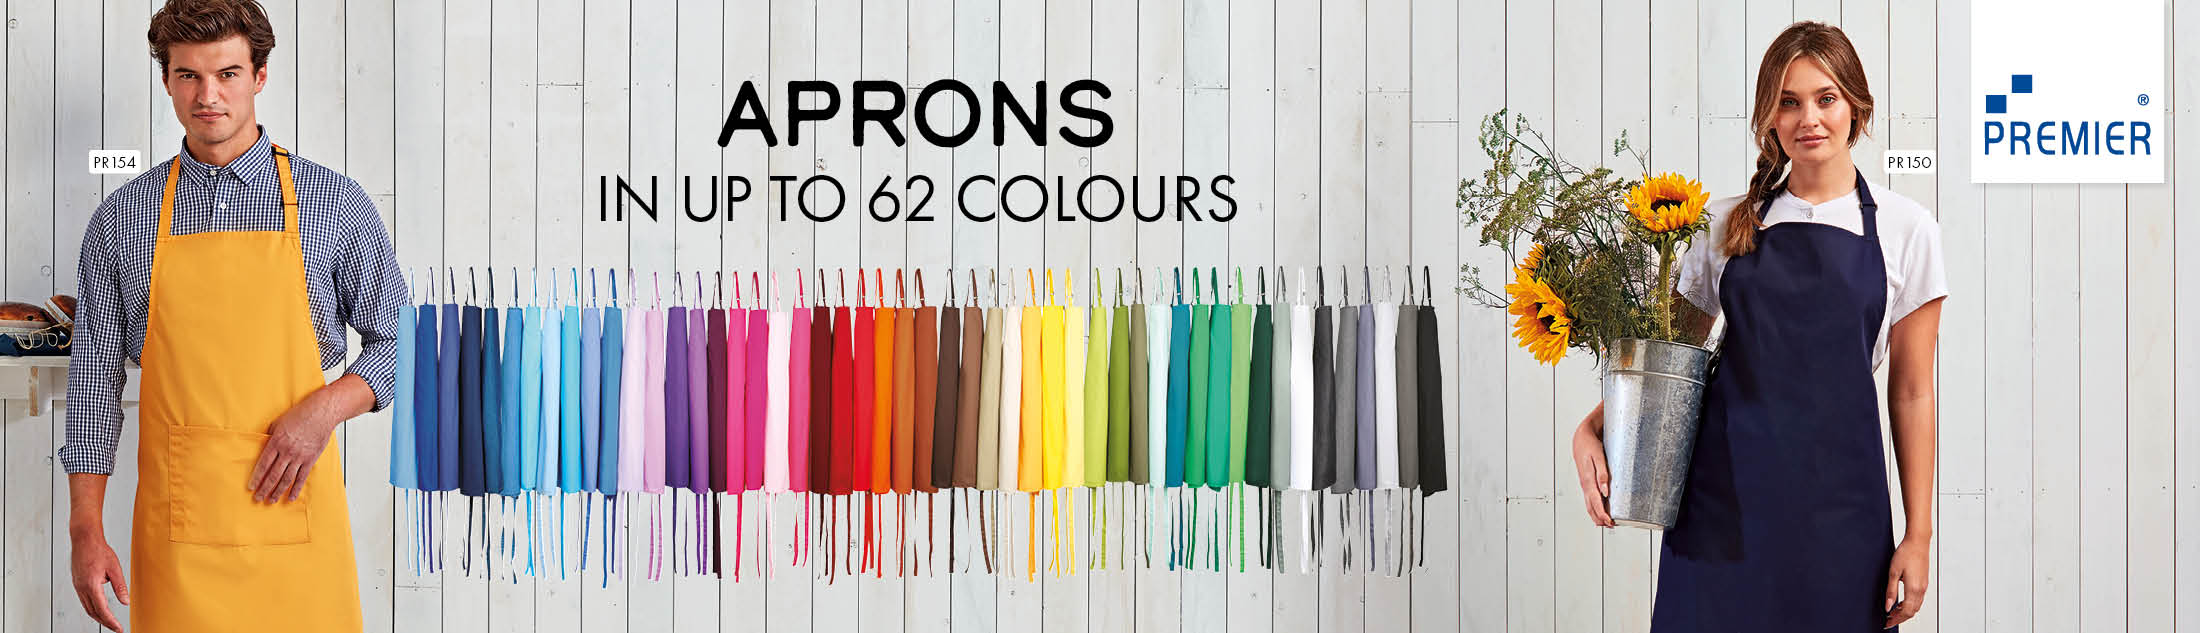 Premier aprons – a colour for every team